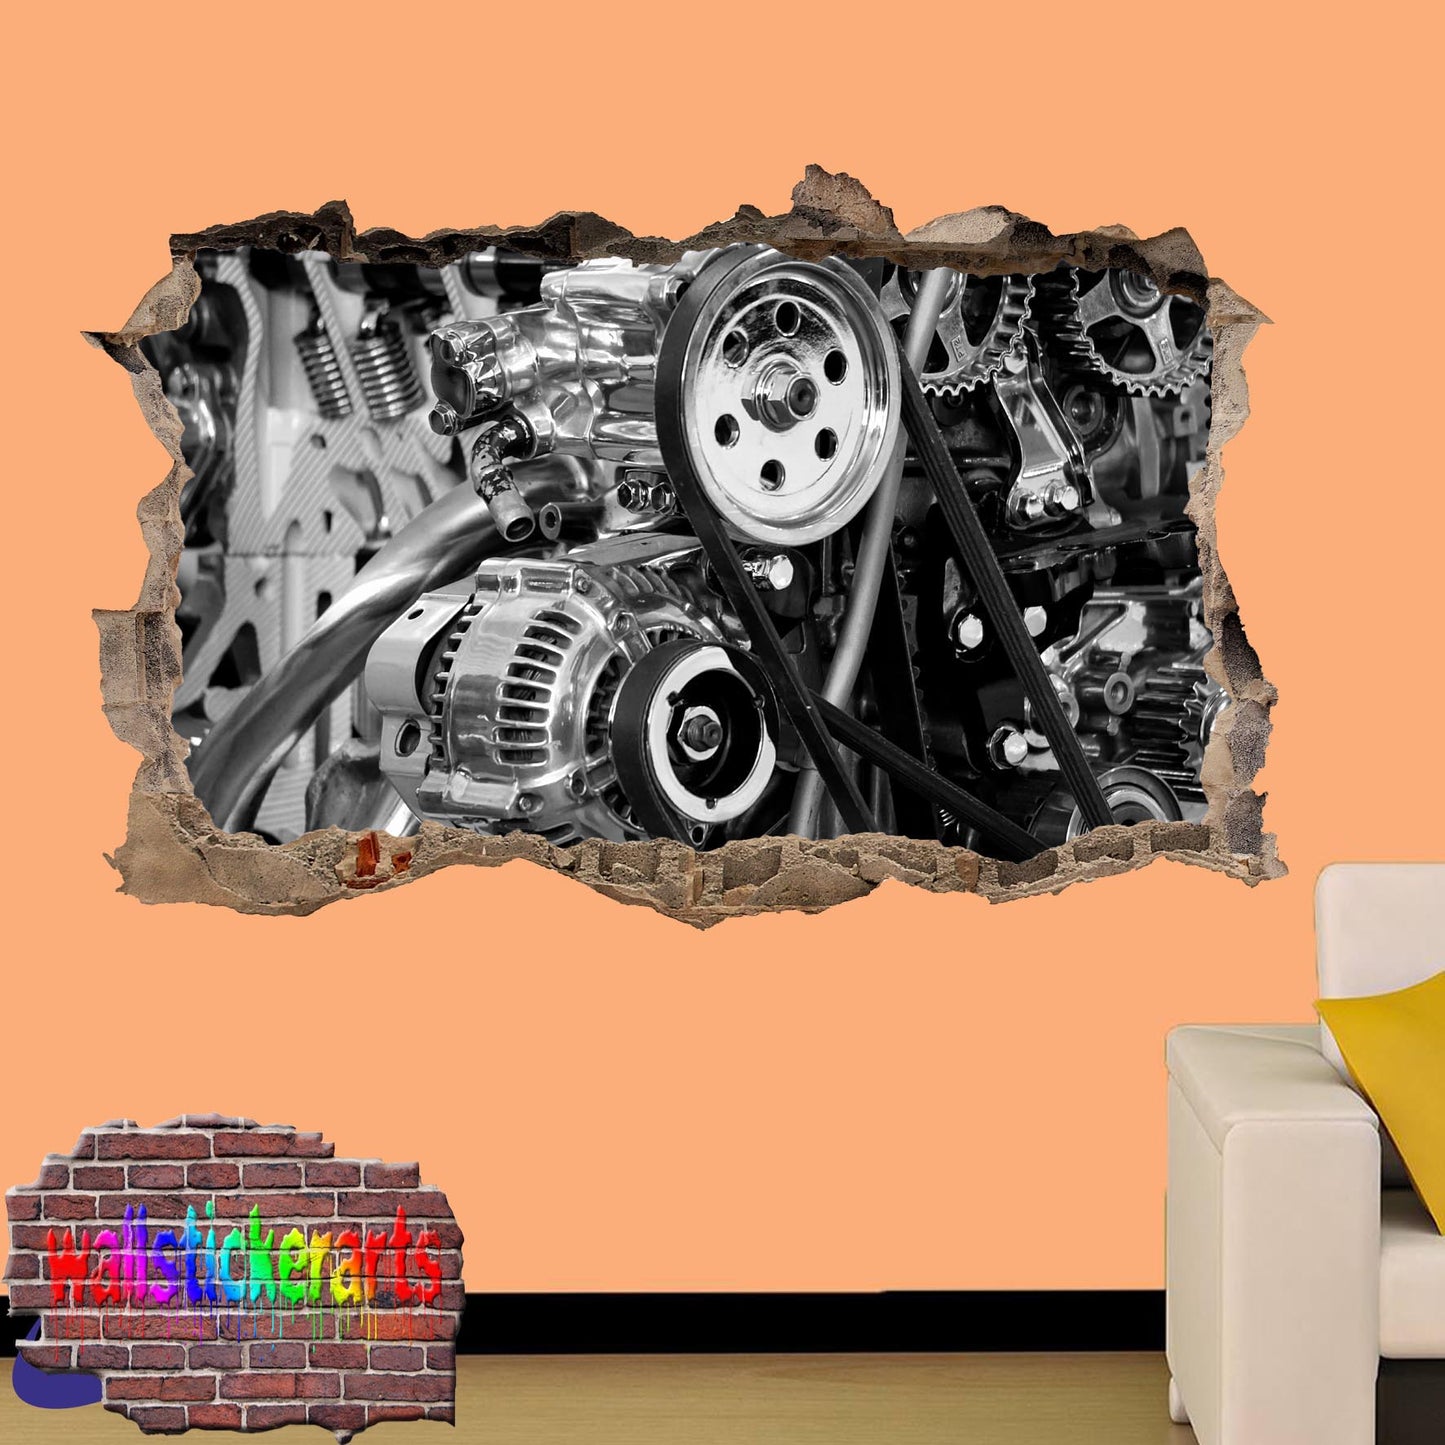 Poweful Car Engine 3d Art Smashed Effect Wall Sticker Room Office Nursery Shop Decoration Decal Mural YV8